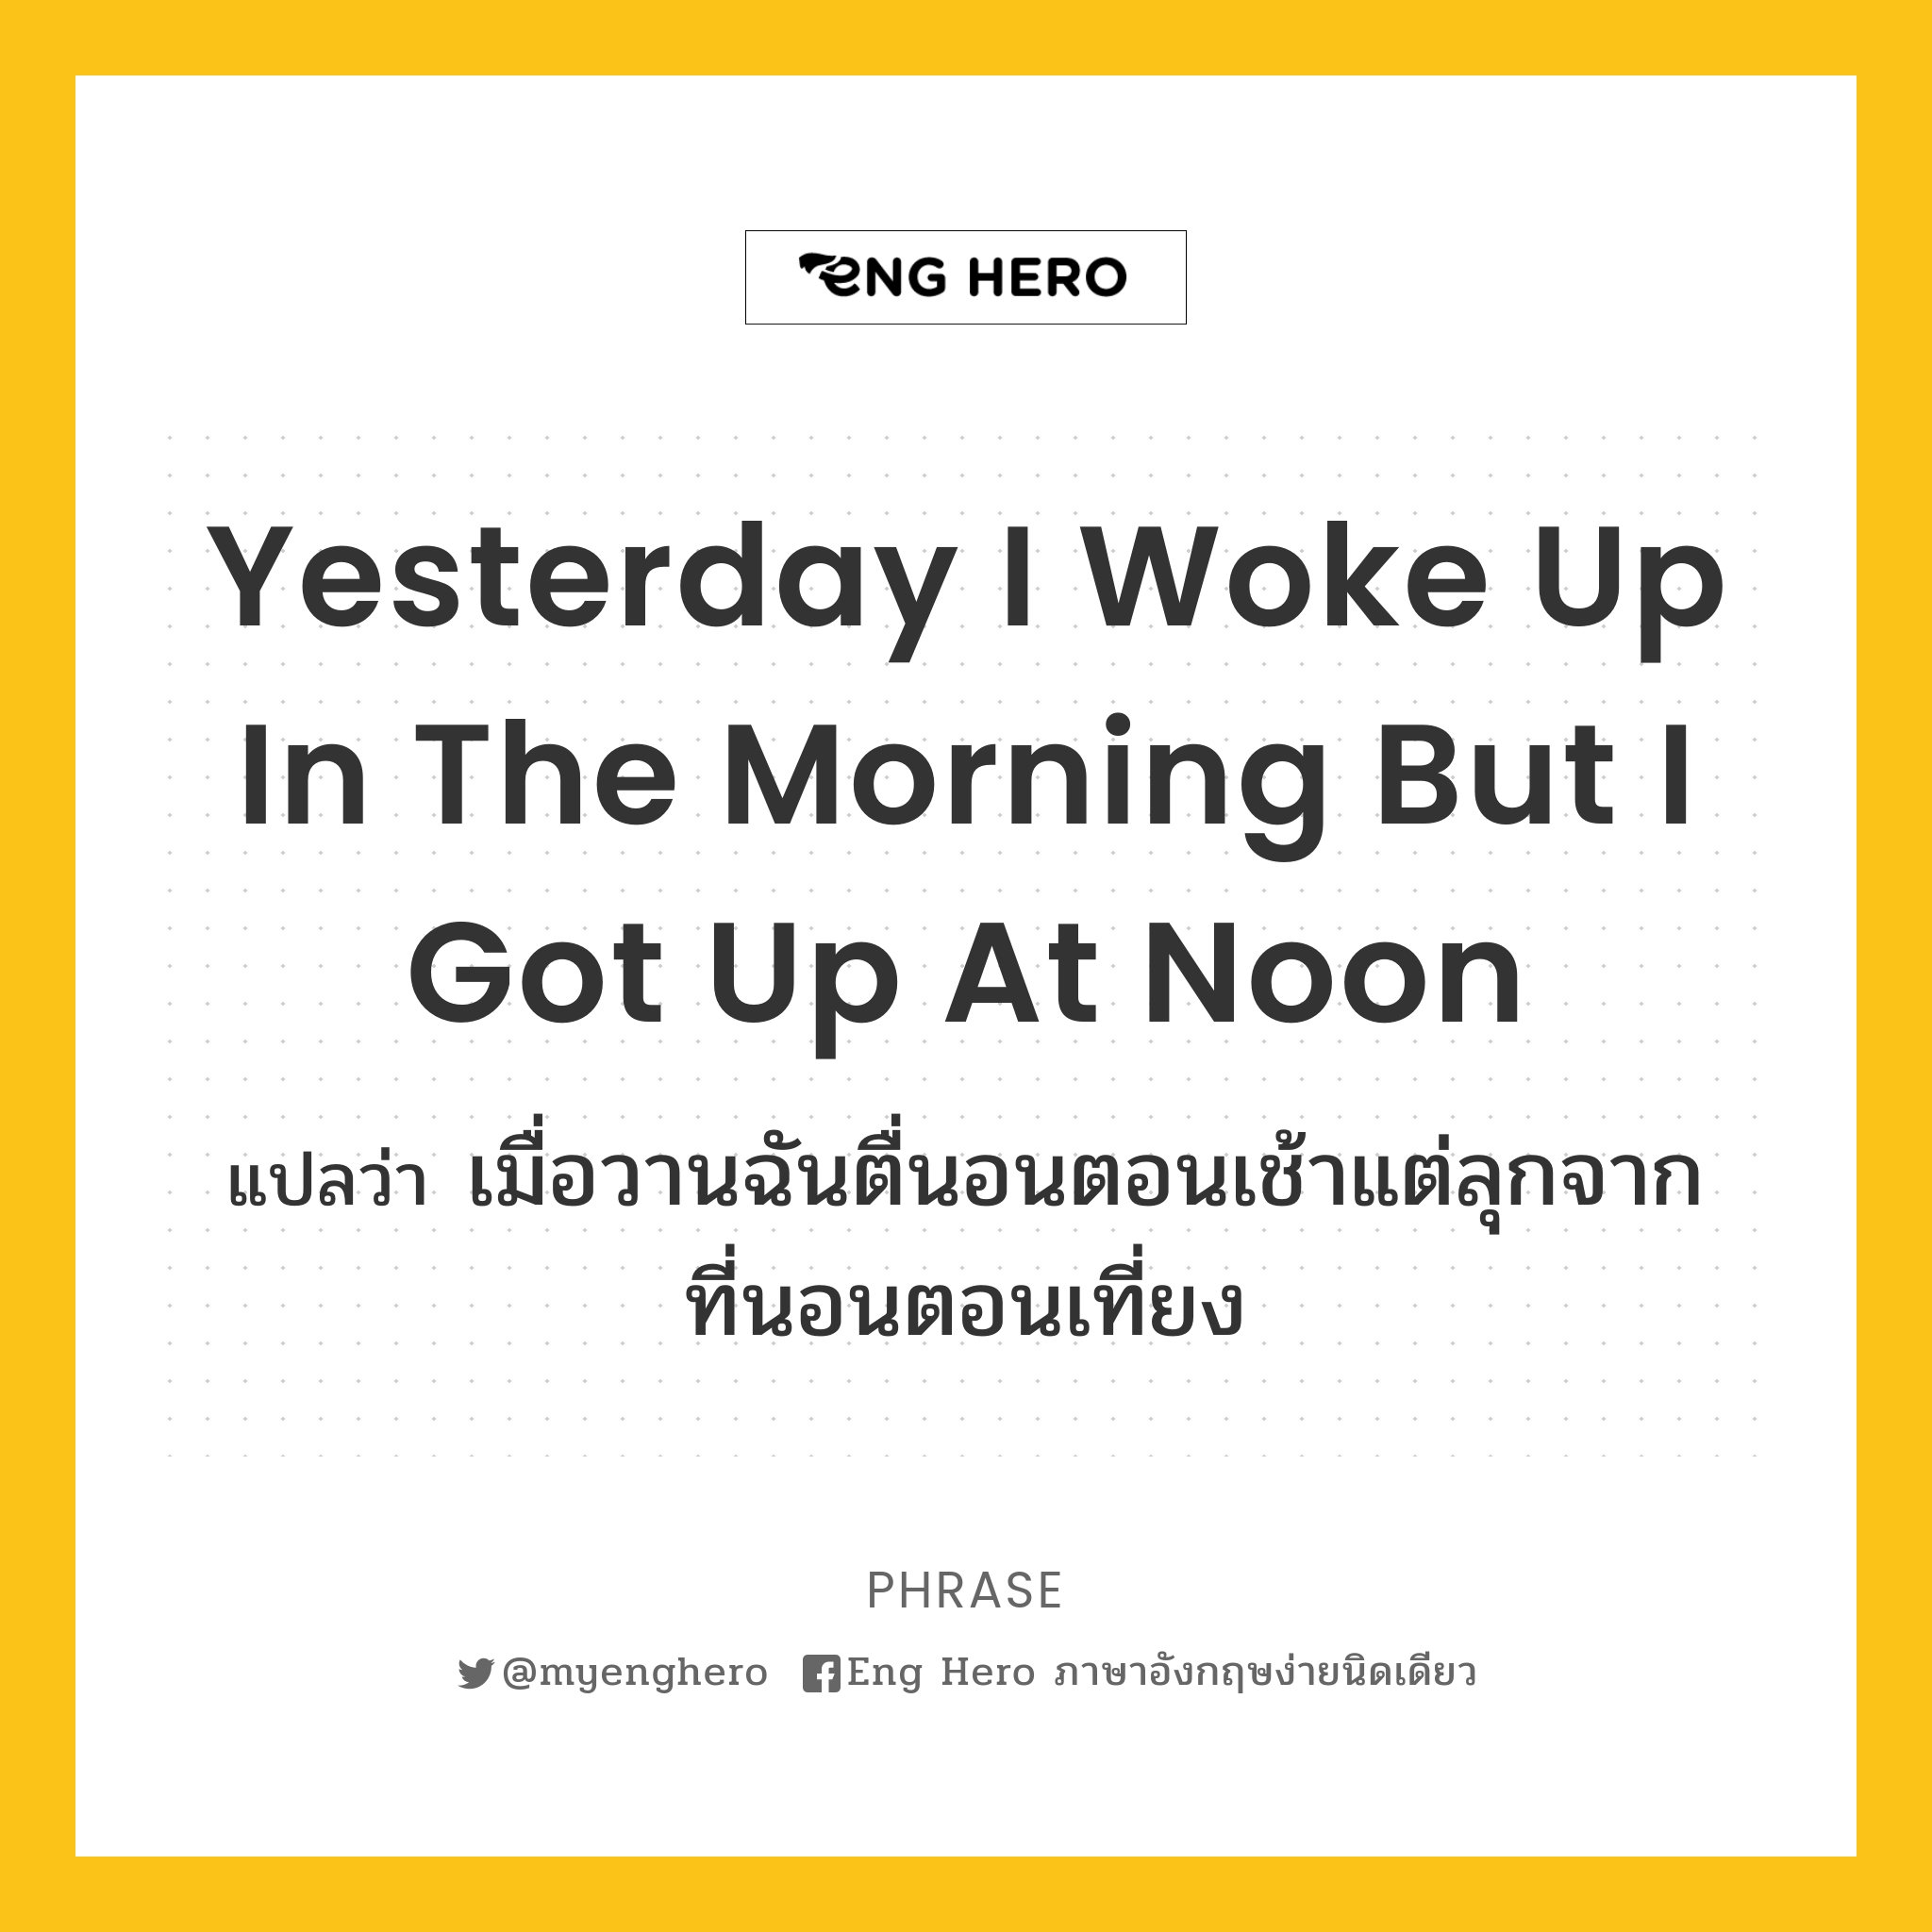 Yesterday I woke up in the morning but i got up at noon